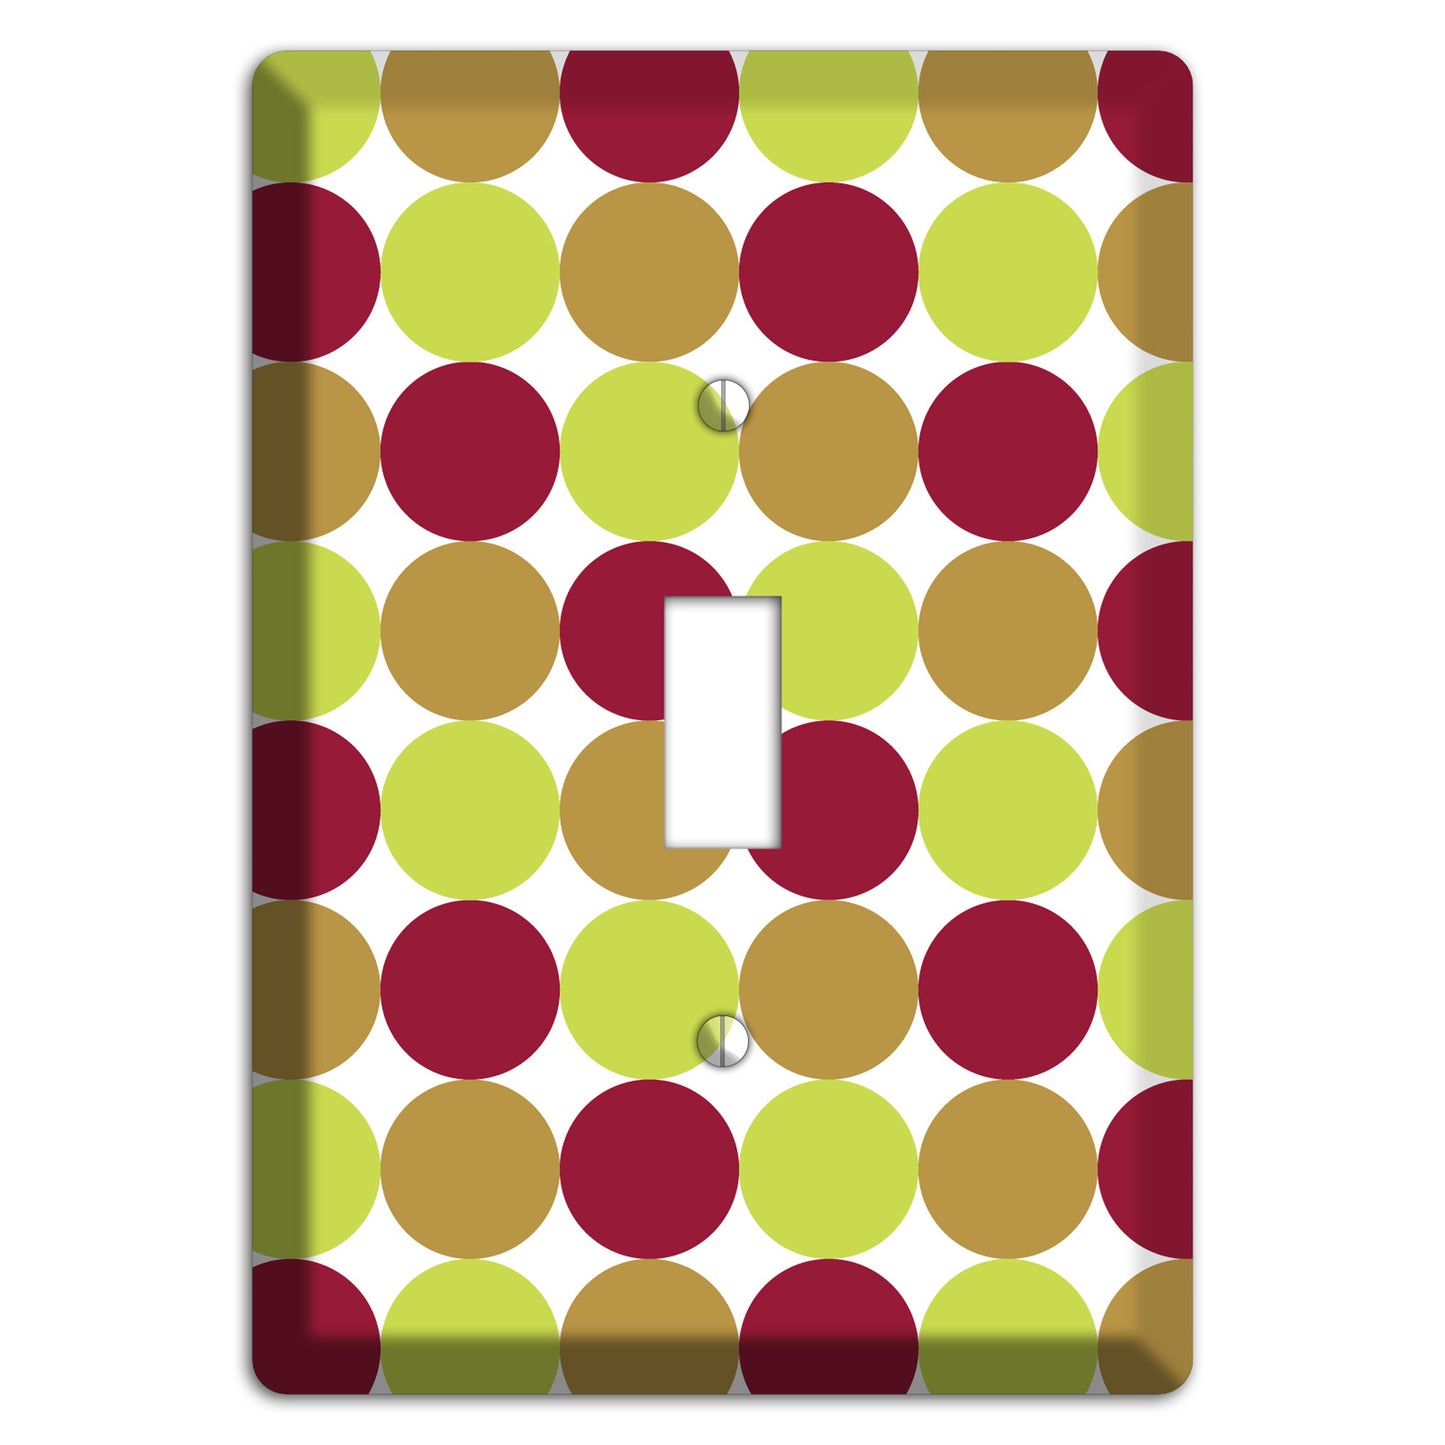 Lime Brown Maroon Tiled Dots Cover Plates